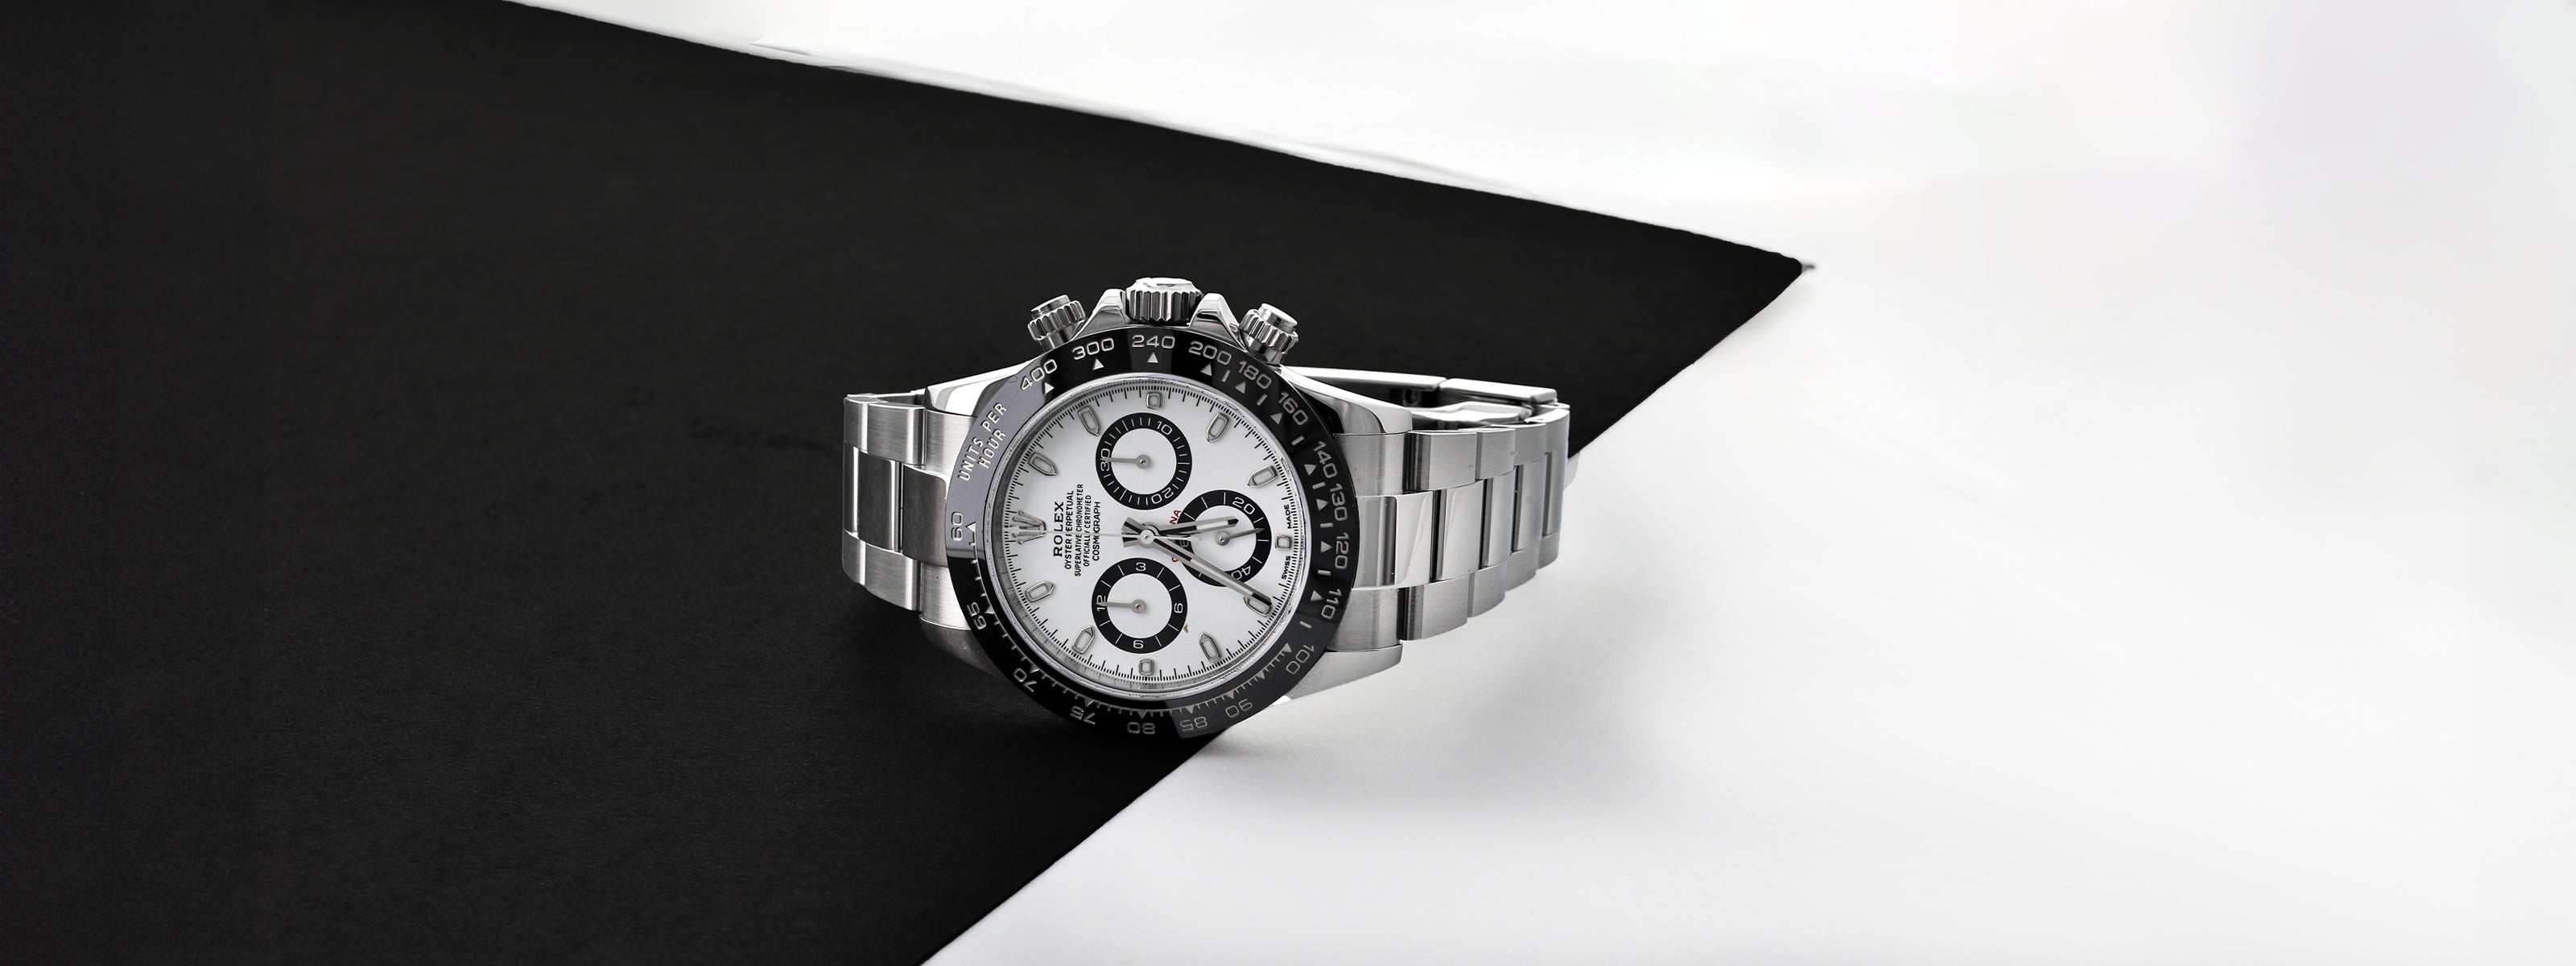 A Step-By-Step Guide to Safely Buying a Pre-Owned Rolex